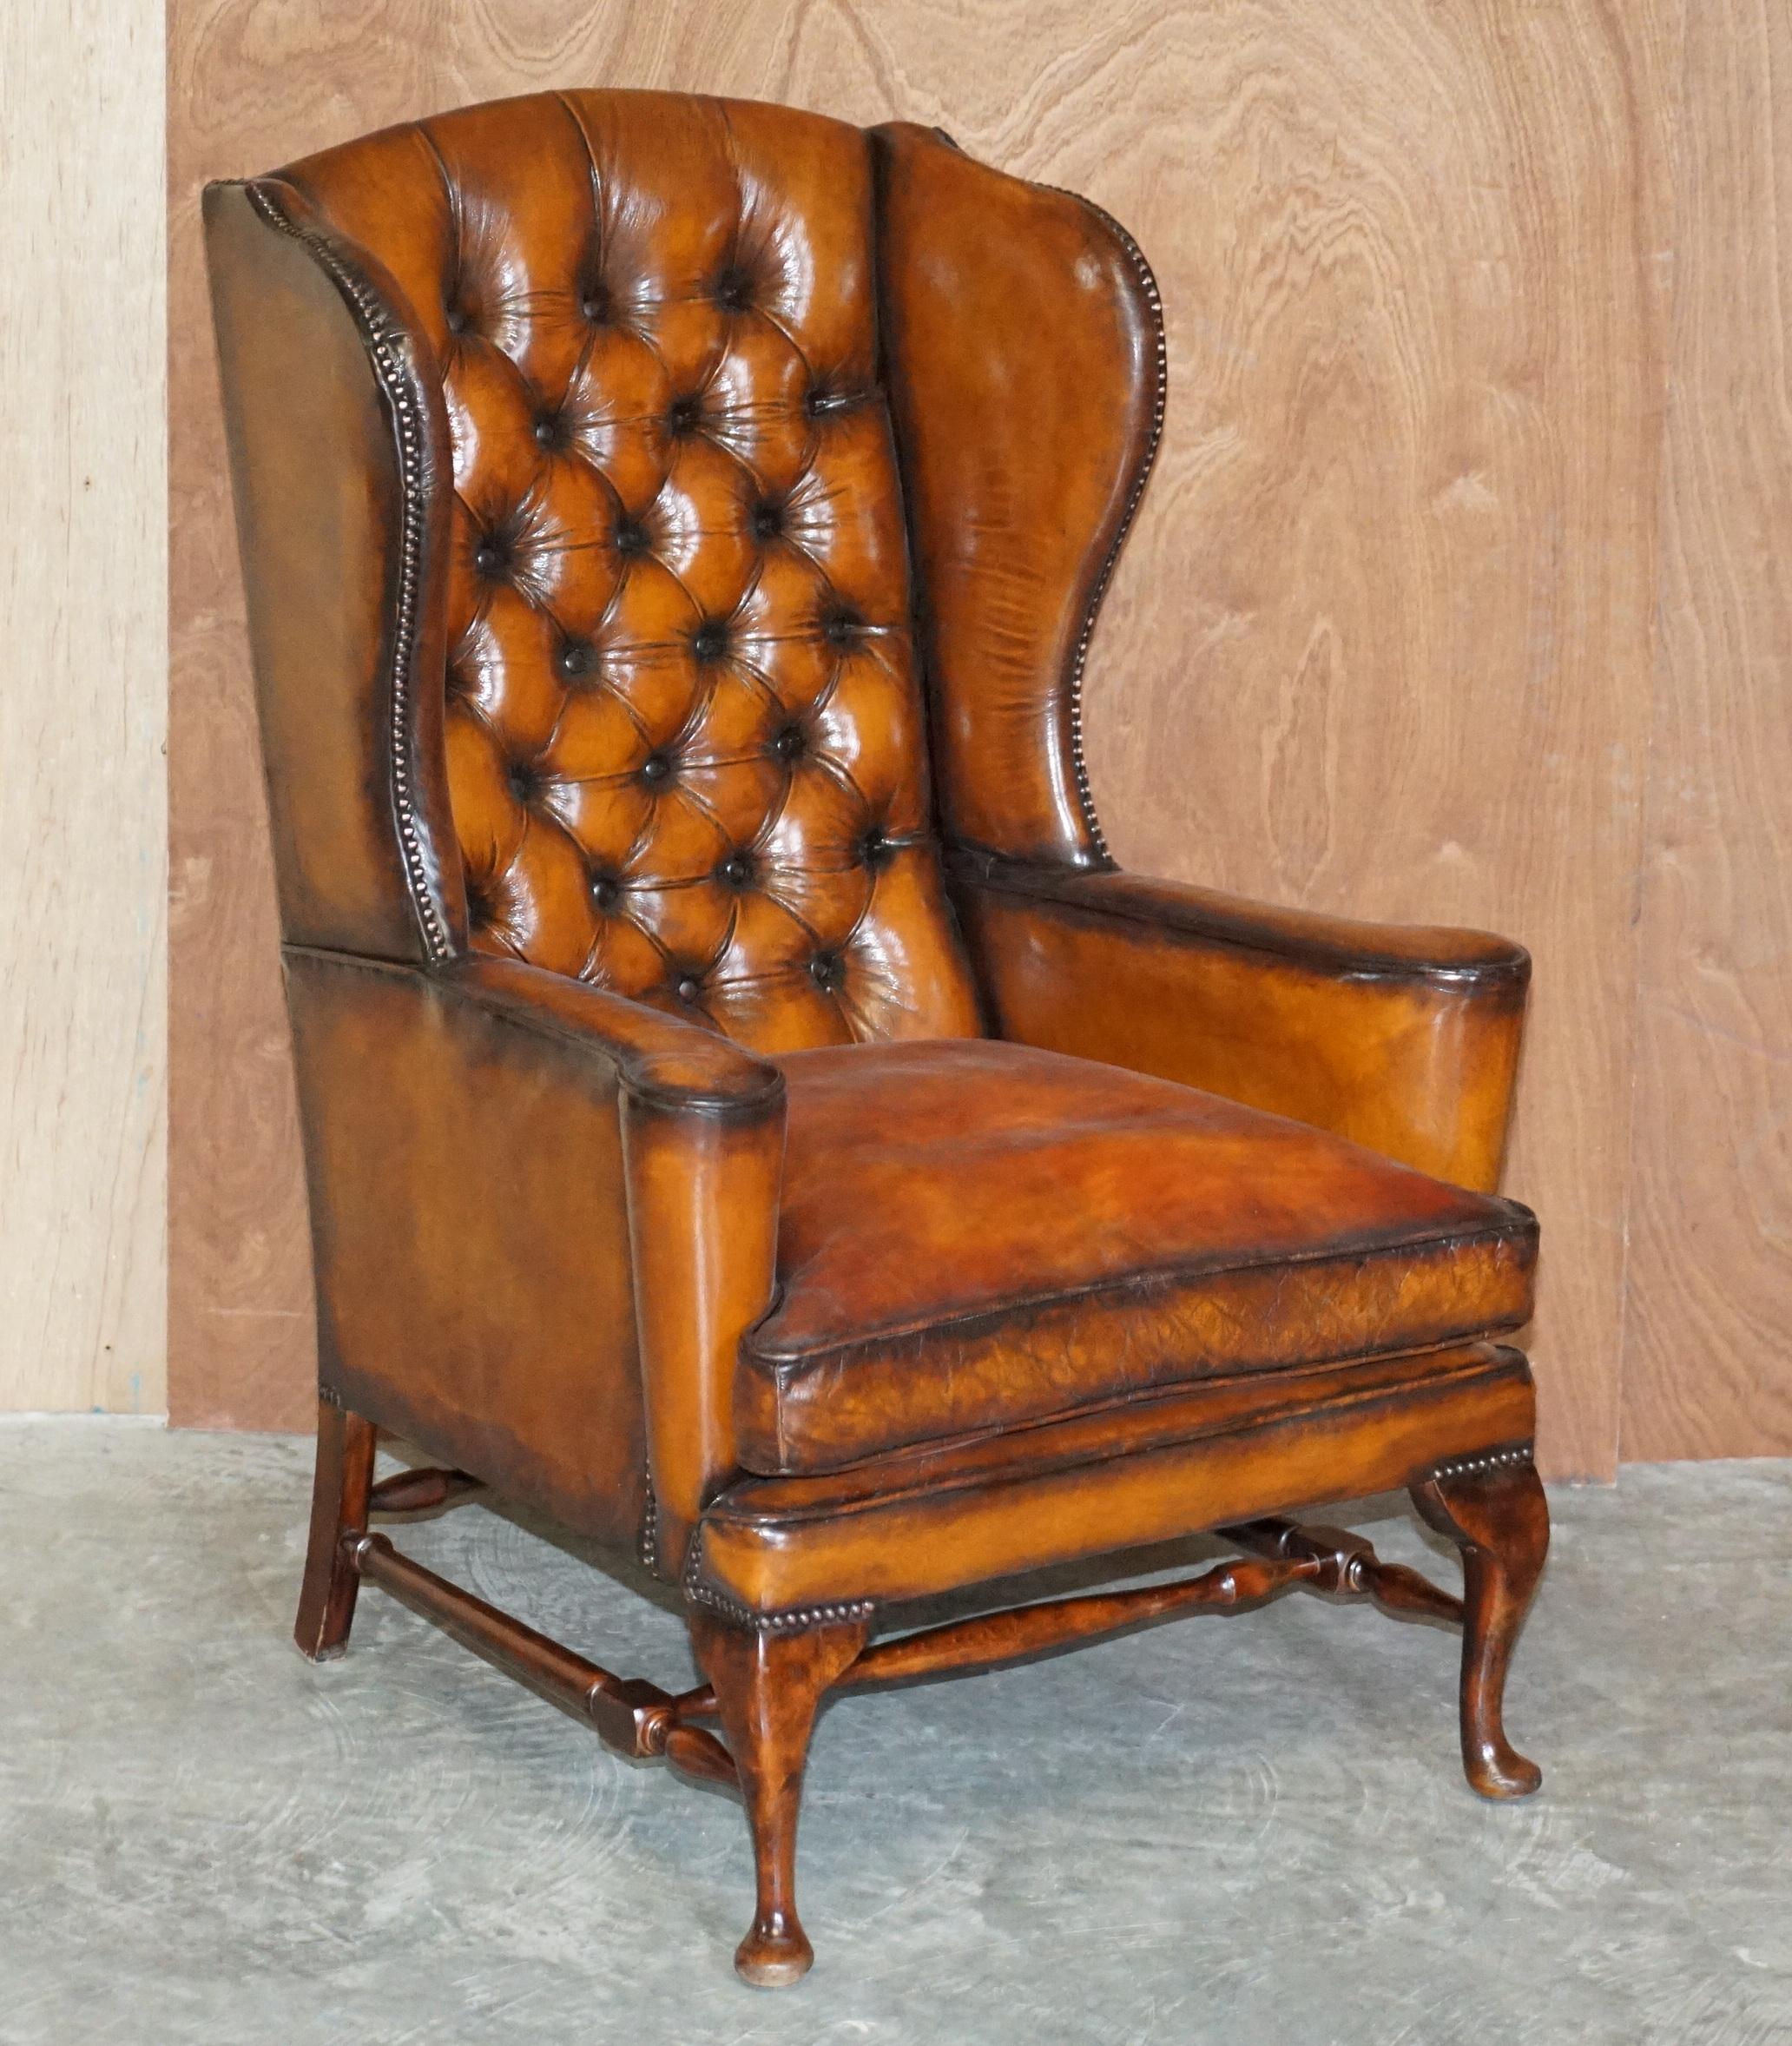 We are delighted to offer for sale this stunning pair of William Morris style fully restored vintage wingback armchairs in Whisky brown leather with thick heavy feather filled cushions.

A good looking and comfortable pair of vintage English